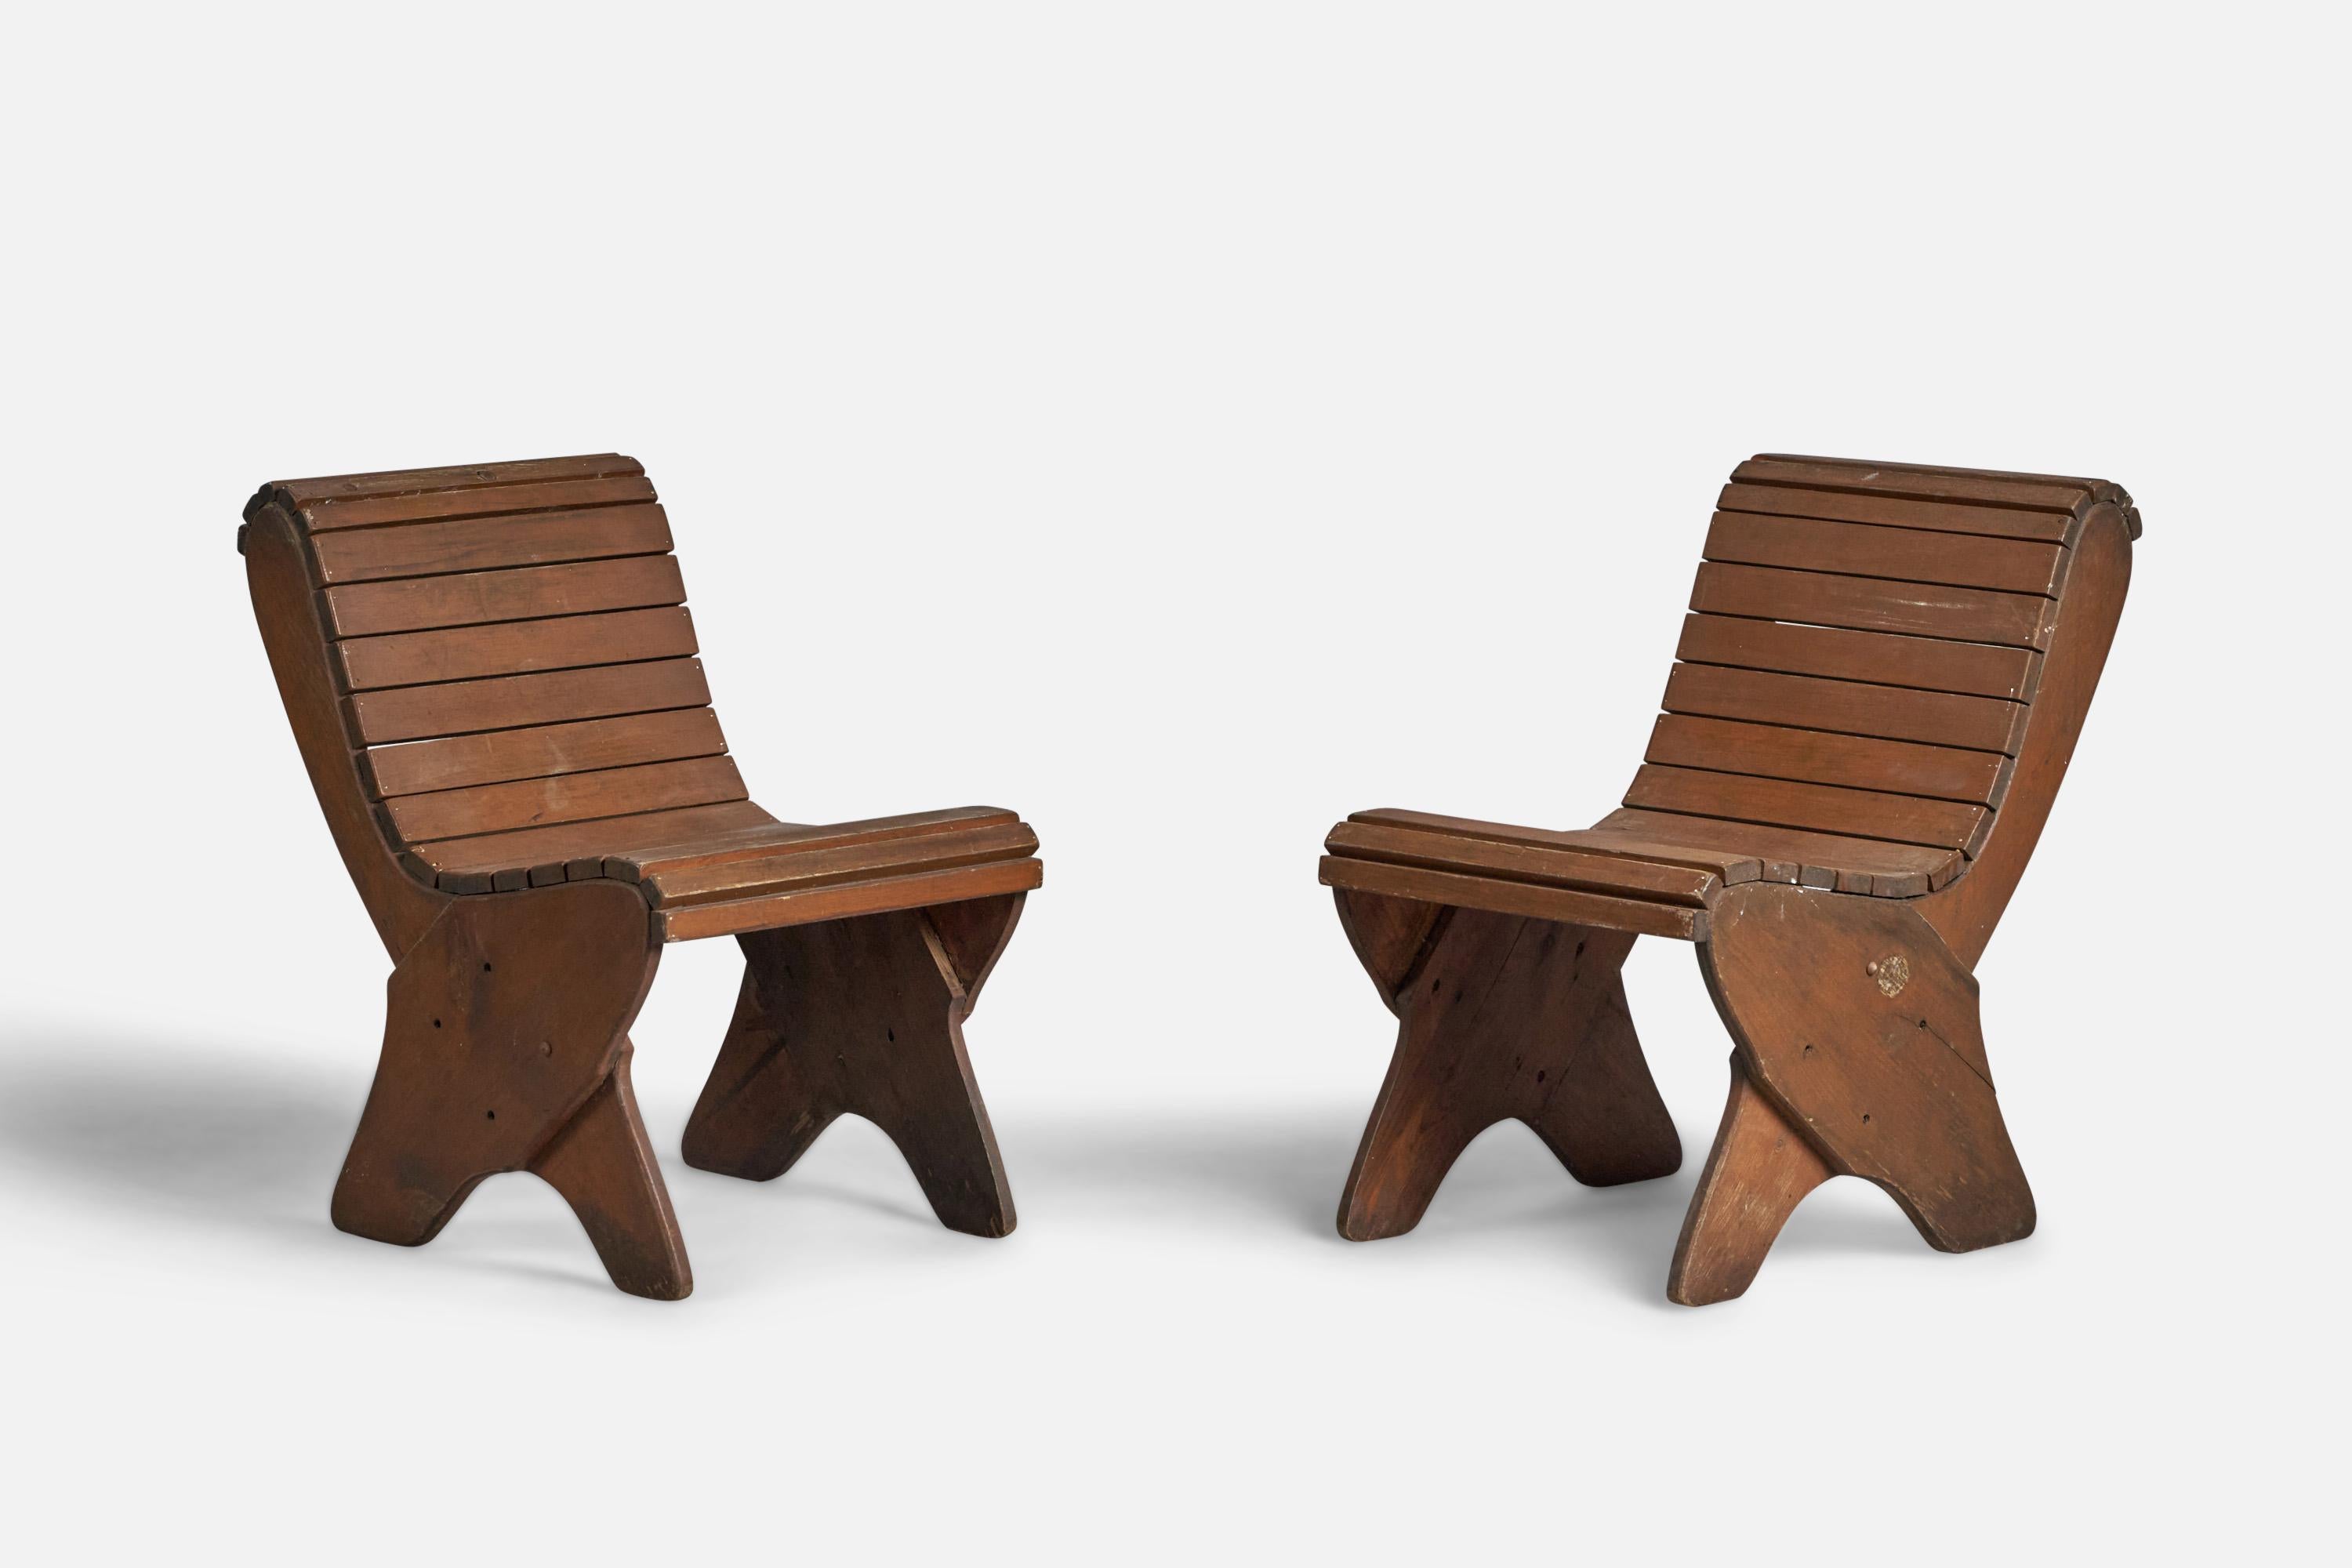 A pair of stained wood side chairs designed and produced in the US, c. 1940s.

16” seat height